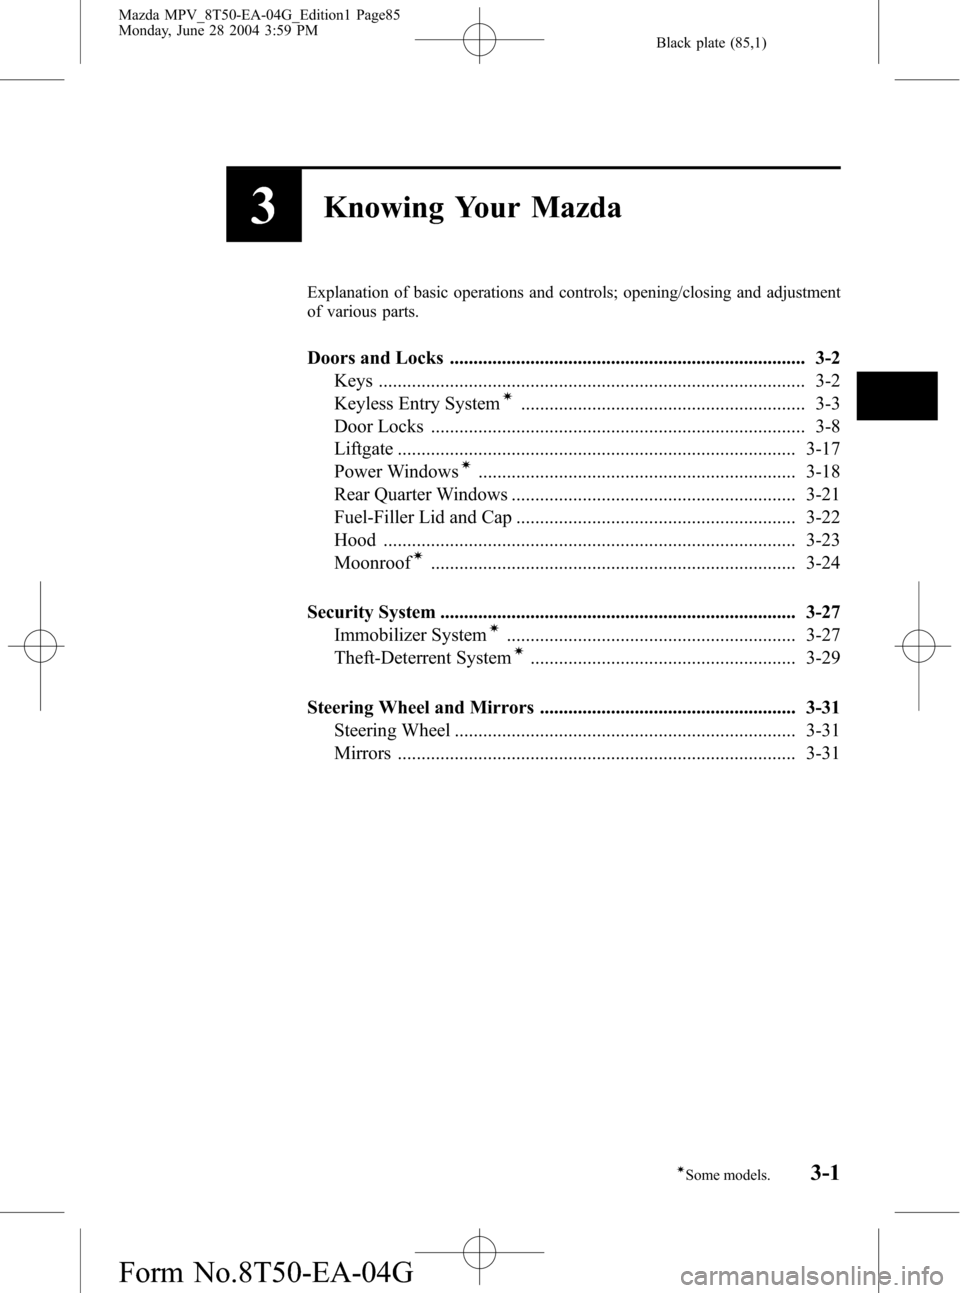 MAZDA MODEL MPV 2005  Owners Manual (in English) Black plate (85,1)
3Knowing Your Mazda
Explanation of basic operations and controls; opening/closing and adjustment
of various parts.
Doors and Locks ..................................................